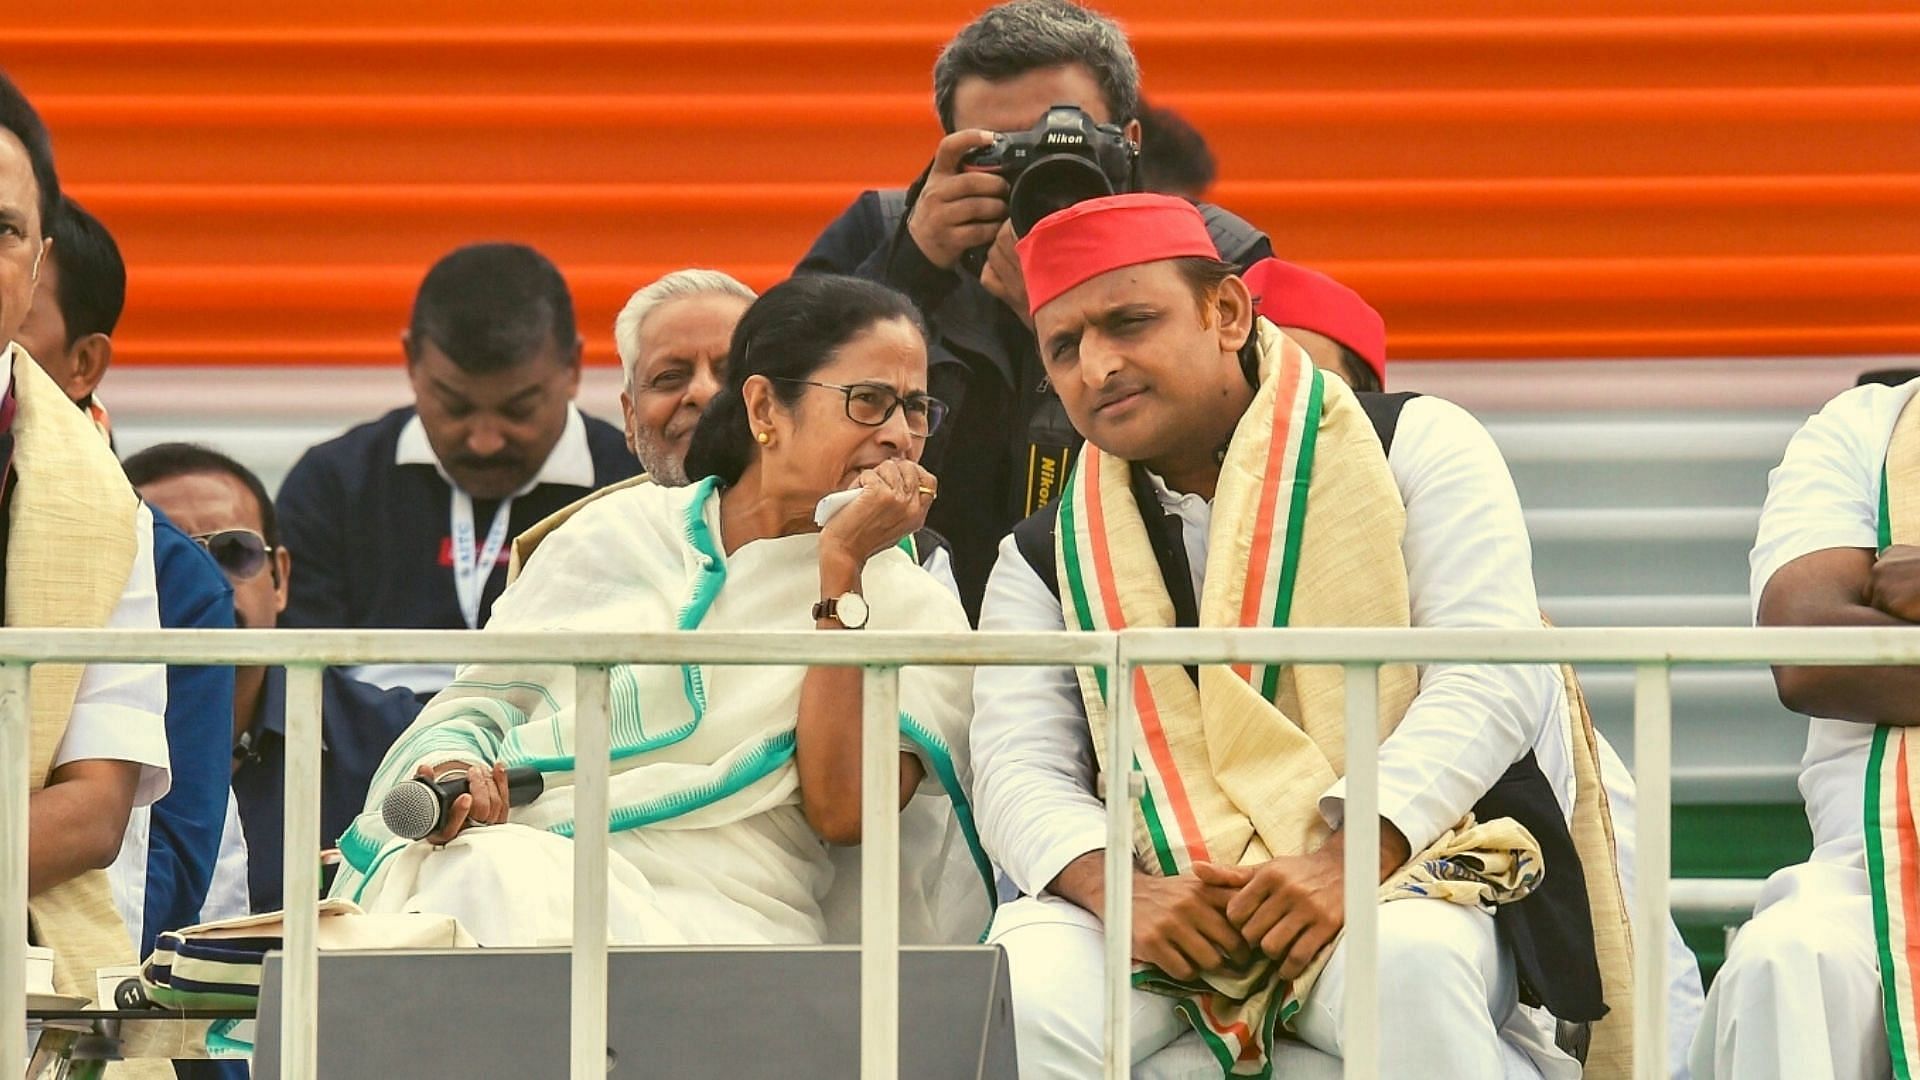 <div class="paragraphs"><p>Banerjee, who is in Uttar Pradesh (UP) to campaign for the Samajwadi Party, said that such actions were indicative of the BJP's imminent defeat in the ongoing <a href="https://www.thequint.com/uttar-pradesh-elections">Uttar Pradesh (UP) polls</a>.</p></div>